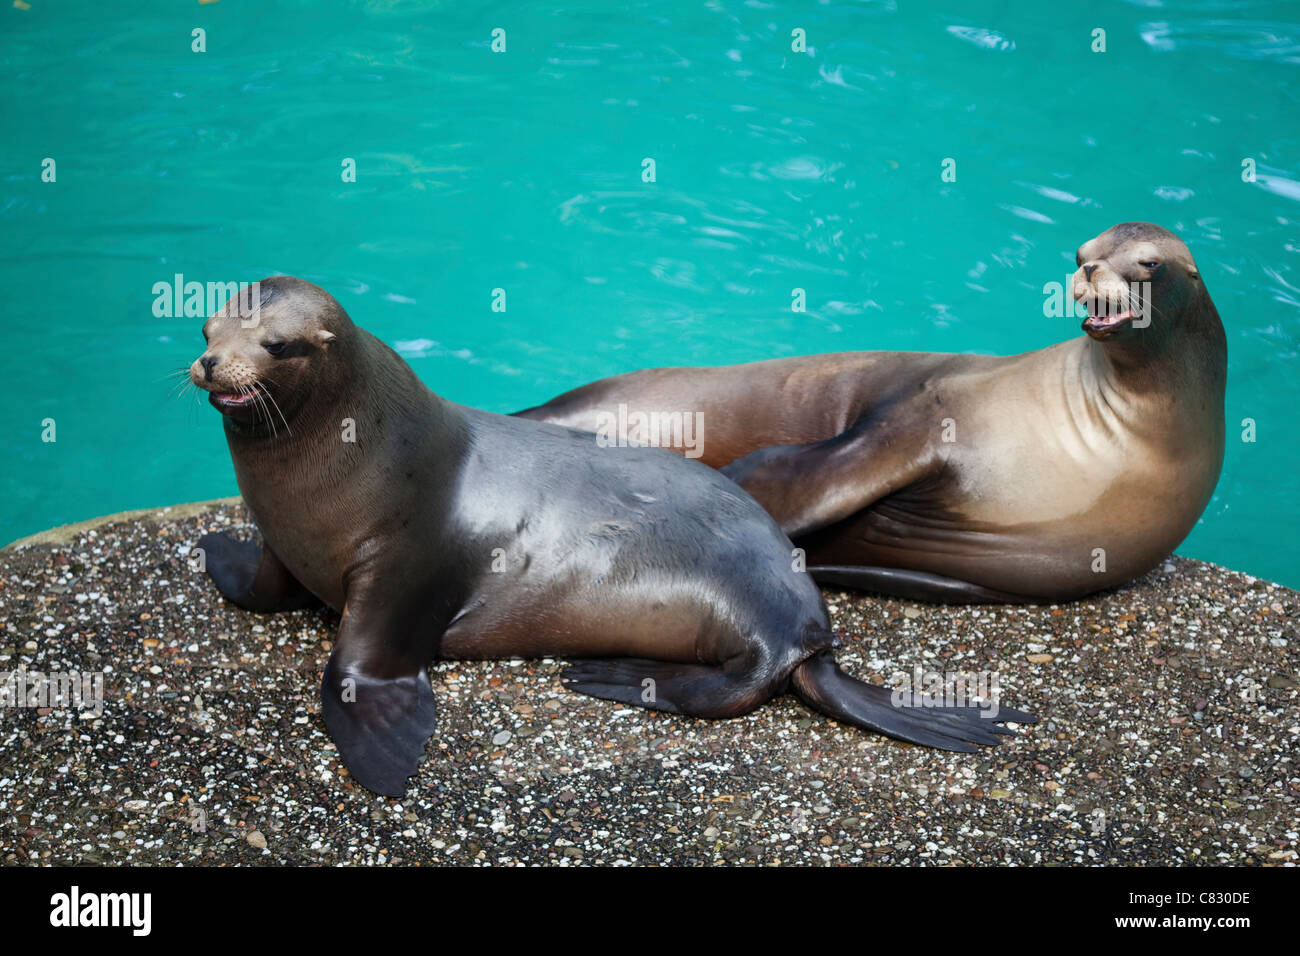 Sea Lions (Zalophus californianus). Two females relaxing on land showing flippers. Wuppertal Zoological Gardens, Germany. Stock Photo